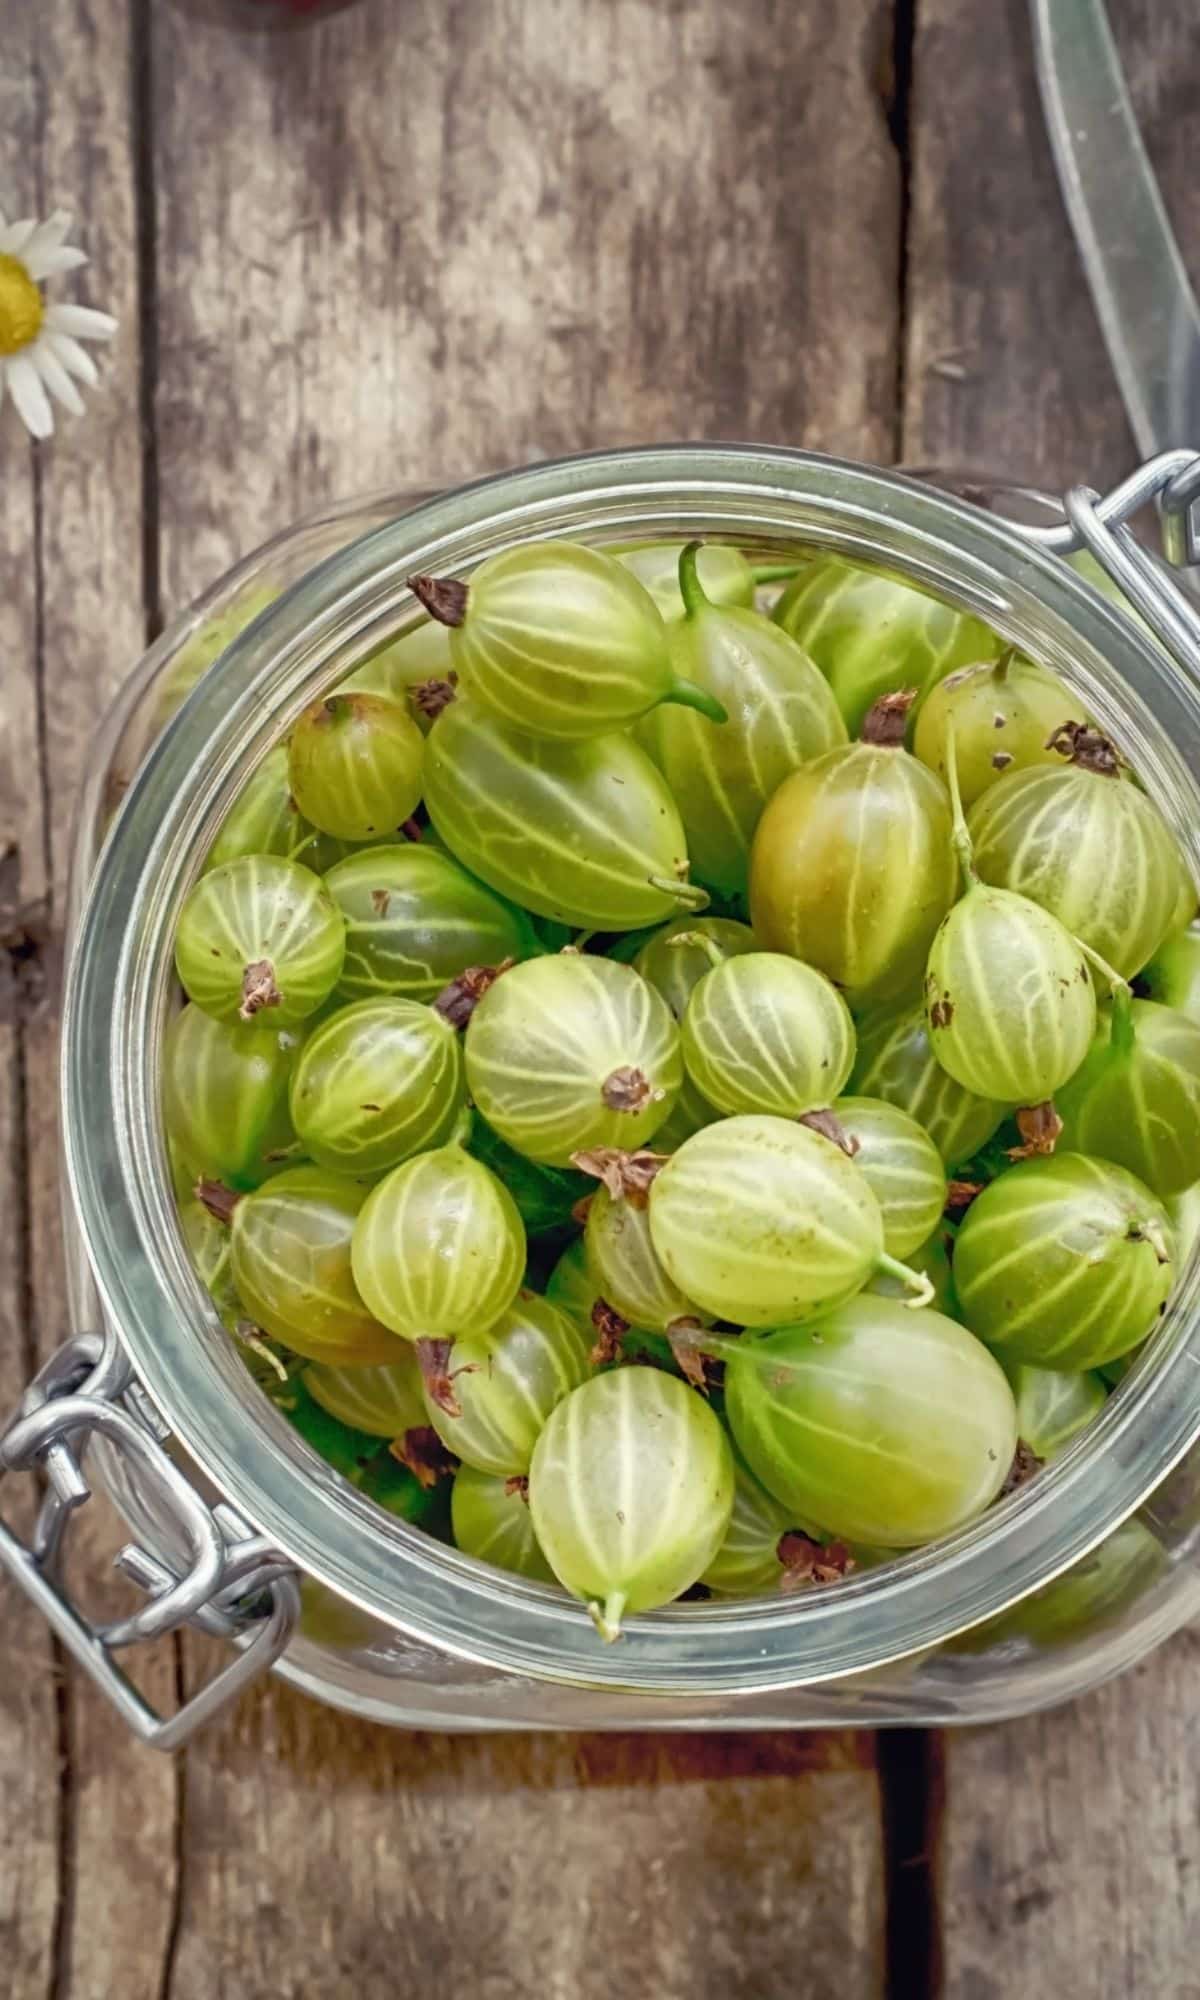 A clear jar full of gooseberries on a wooden table.